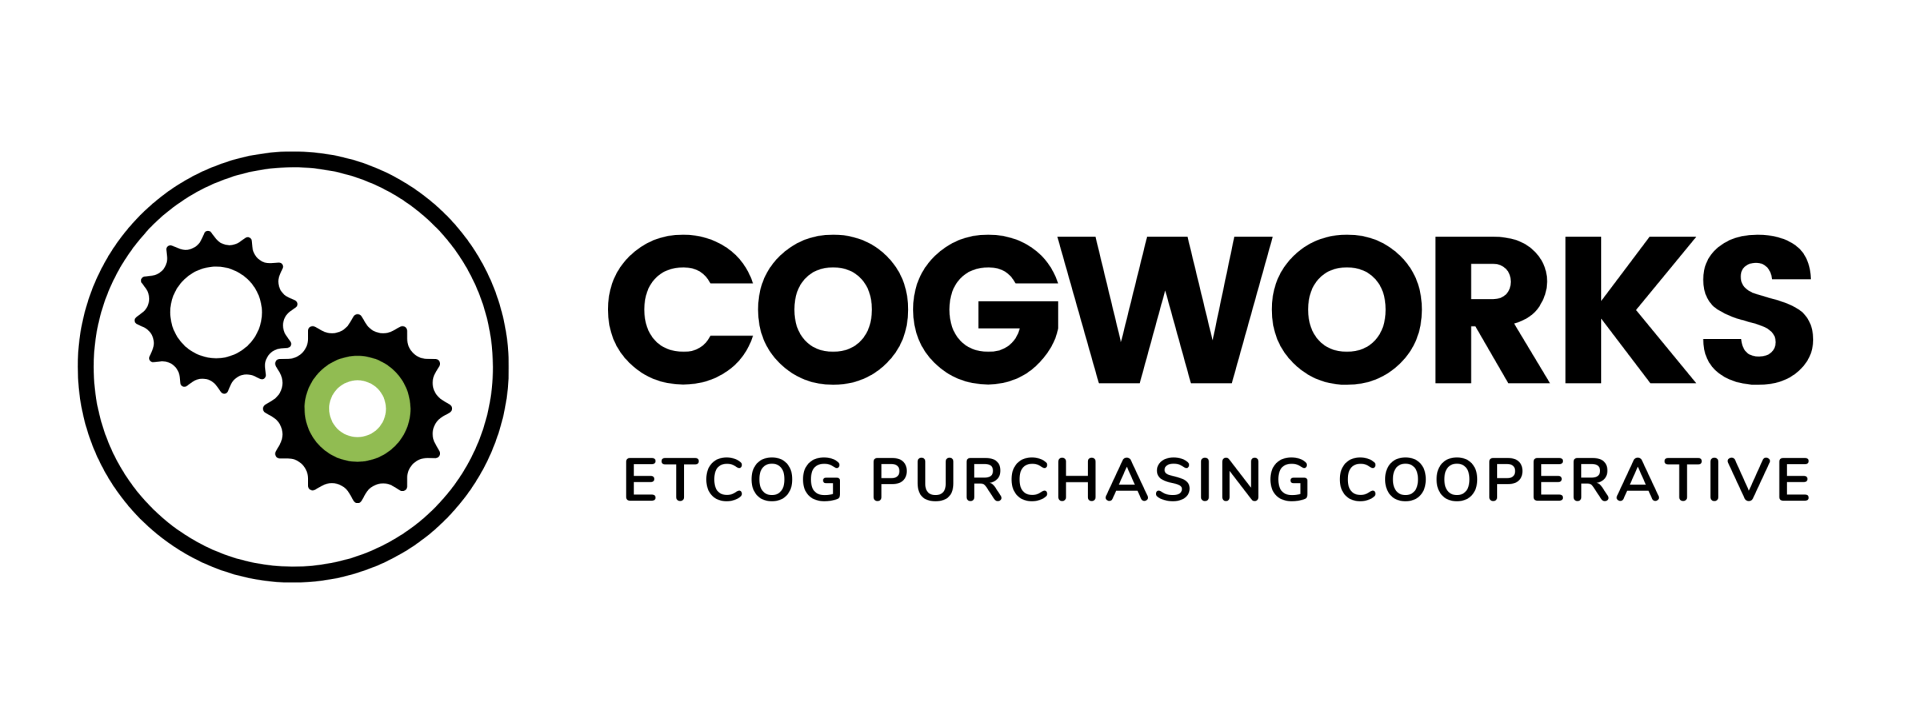 A logo for cogworks , a company that is purchasing cooperative.